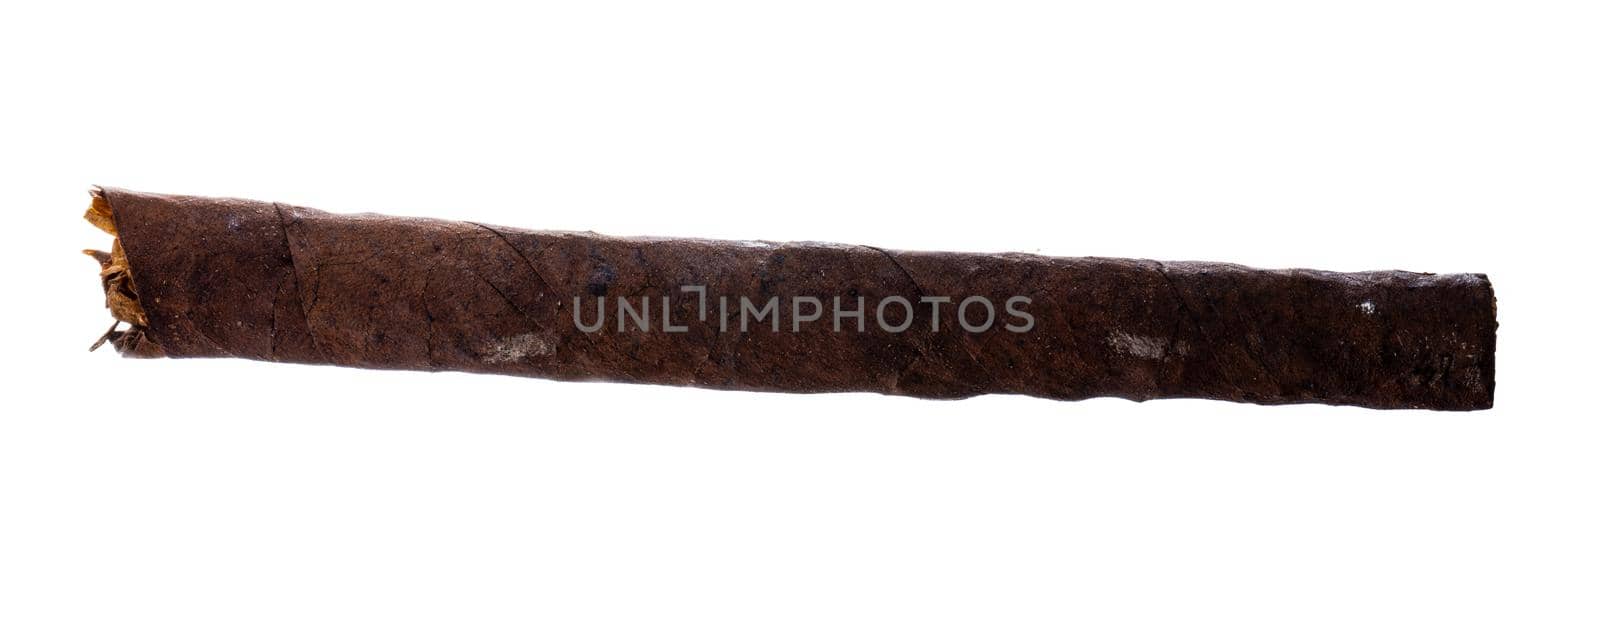 One hand rolled cigar isolated on white by Fabrikasimf